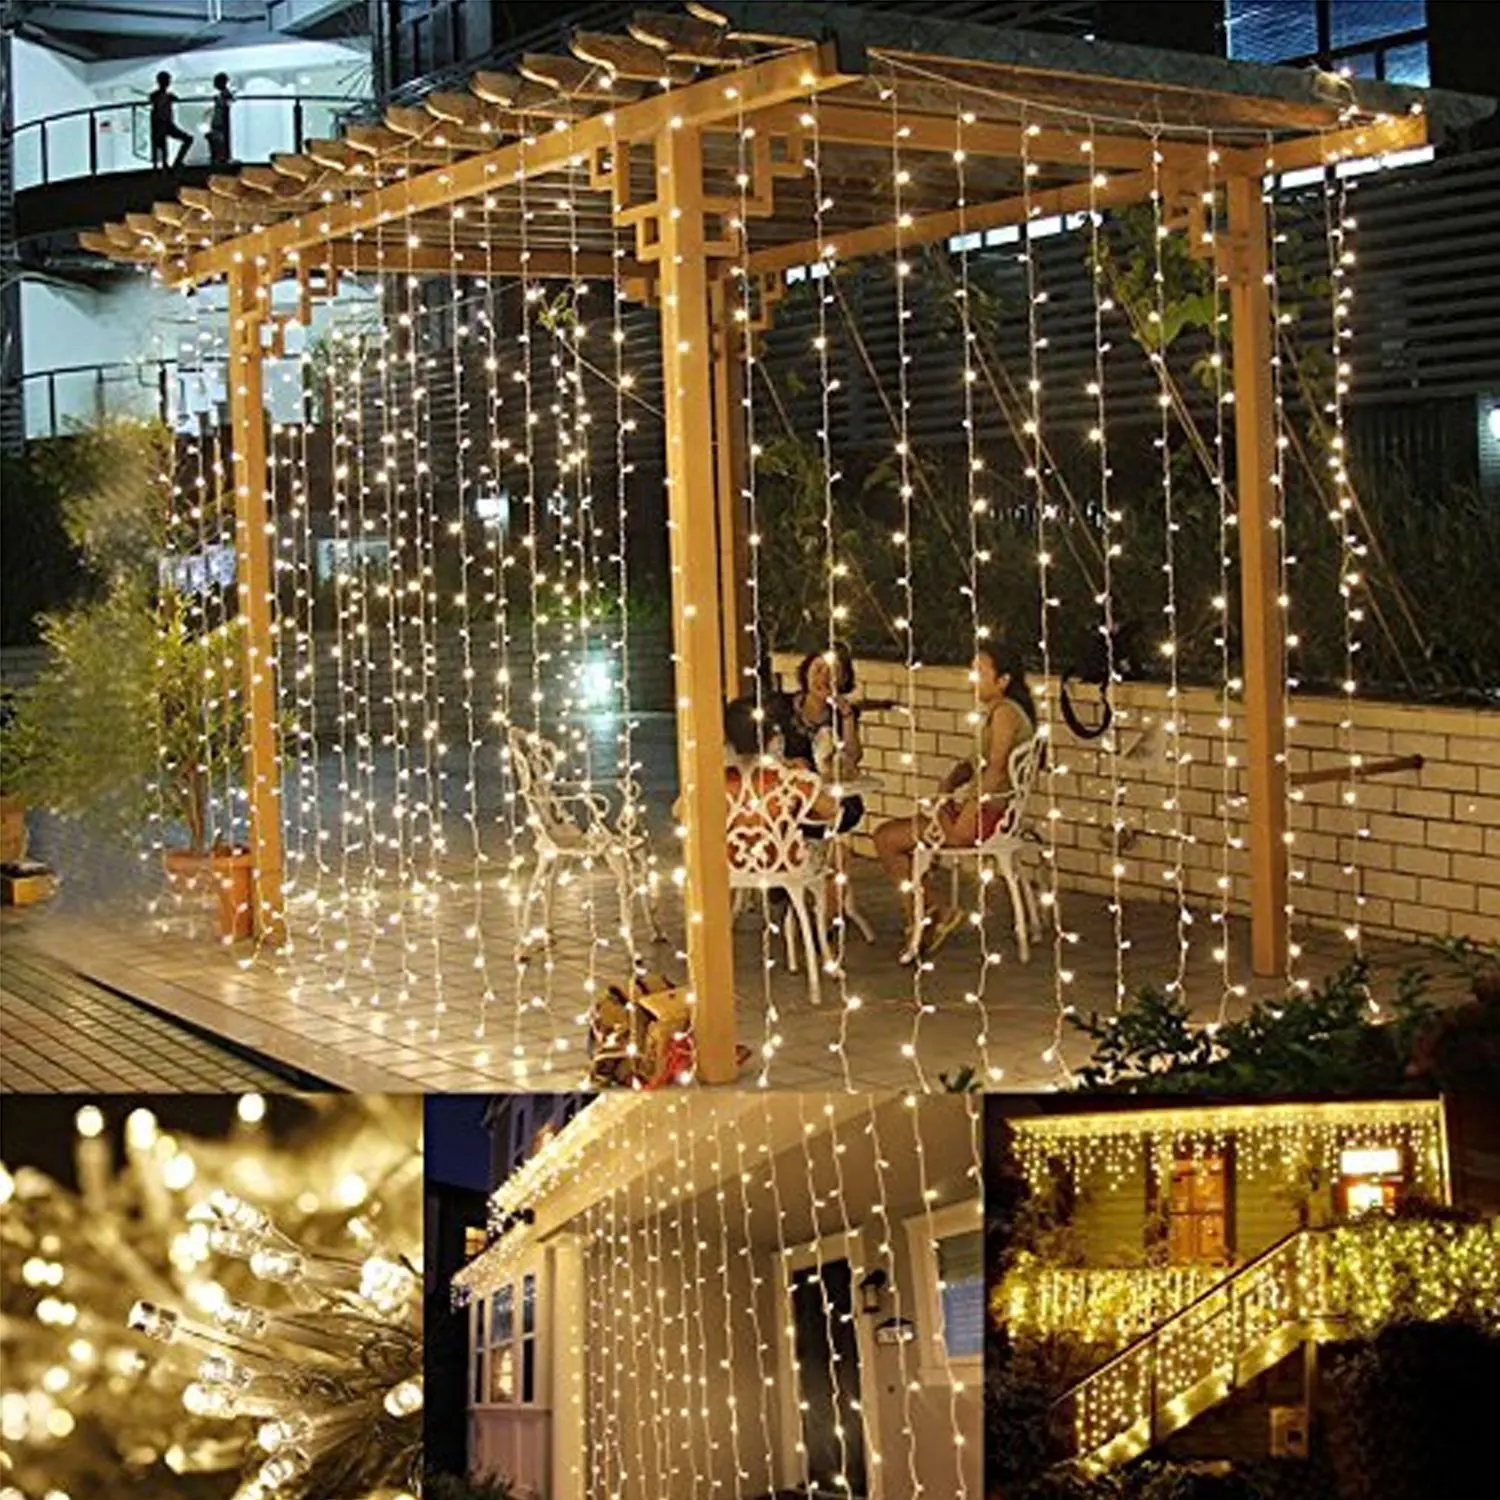 Buy TOAO Led Light Window Curtain Icicle Lights 300led,9.8ft x 9.8ft,8 Modes,Christmas Curtain